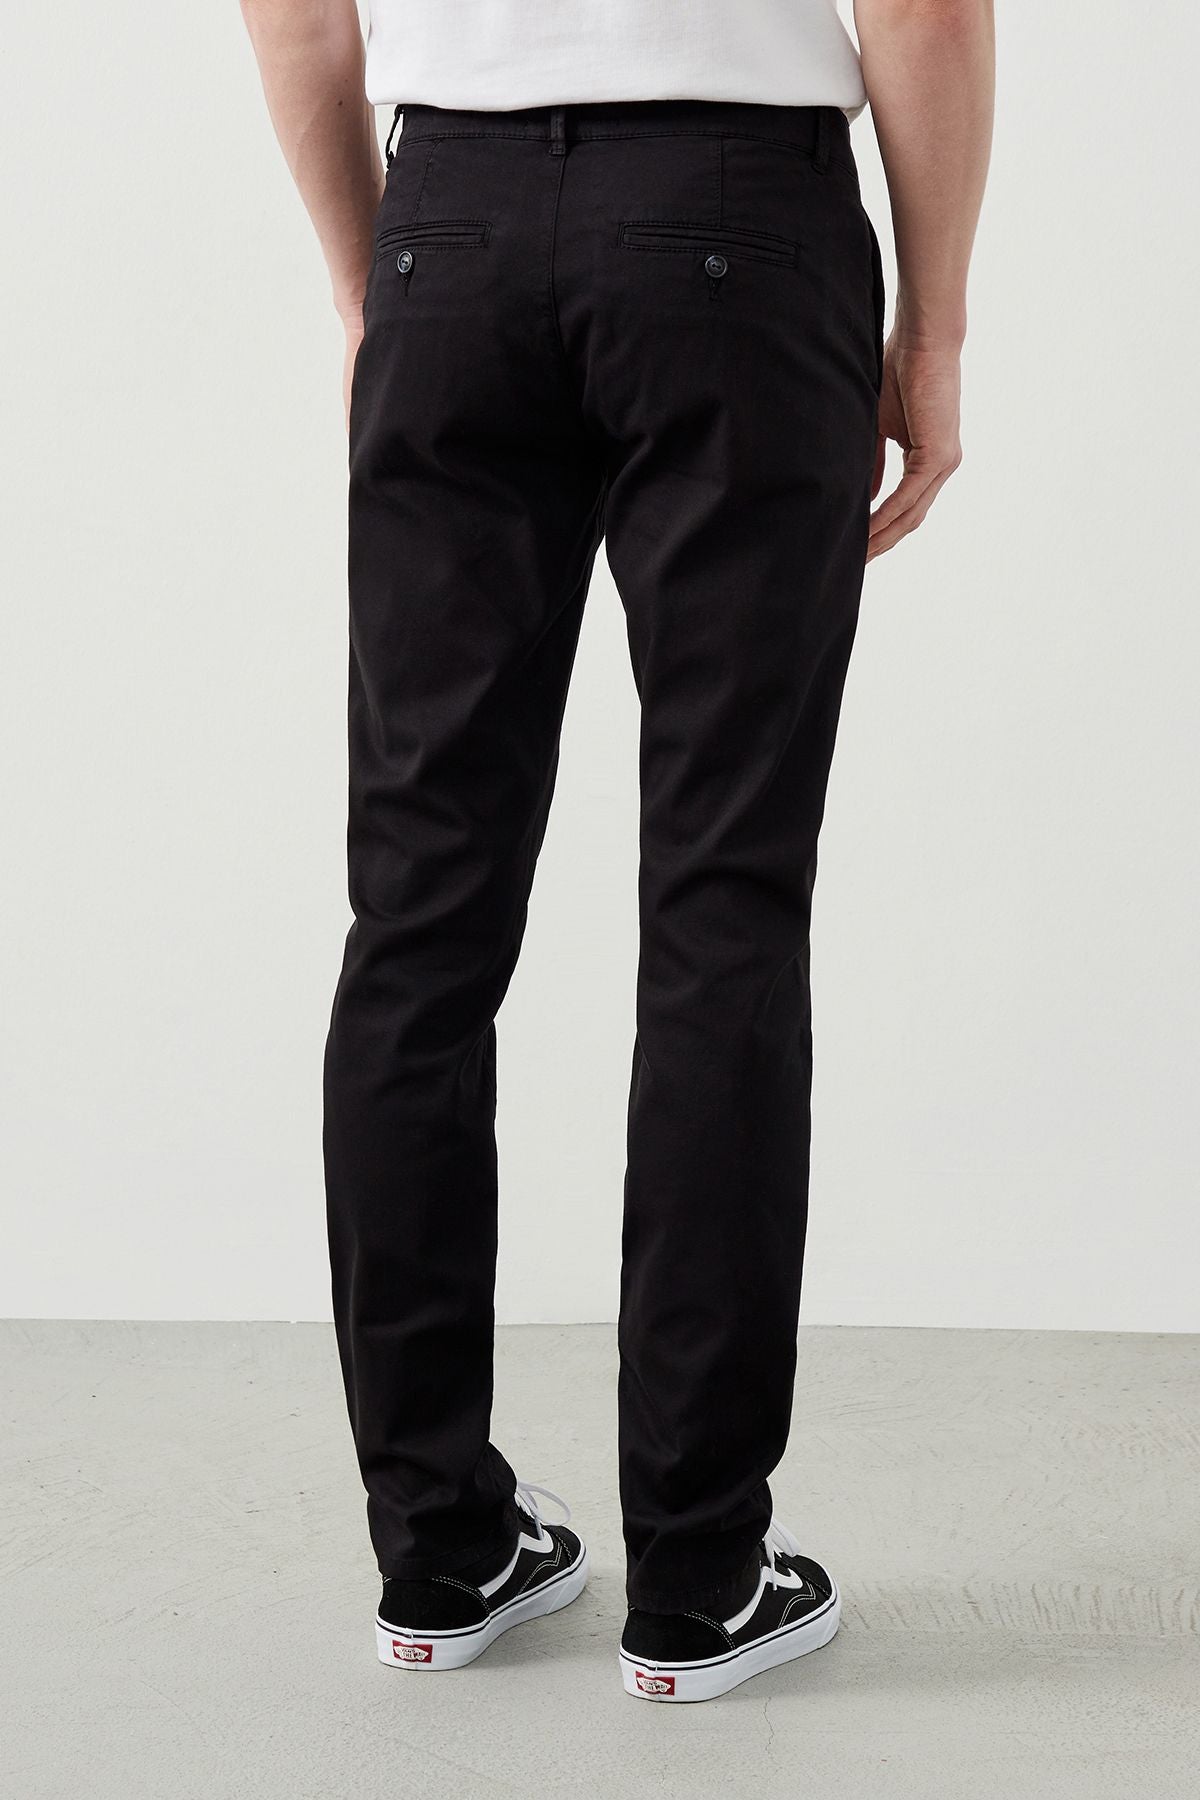 Back view of sleek black chino pants, featuring buttoned back pockets for added style and functionality.